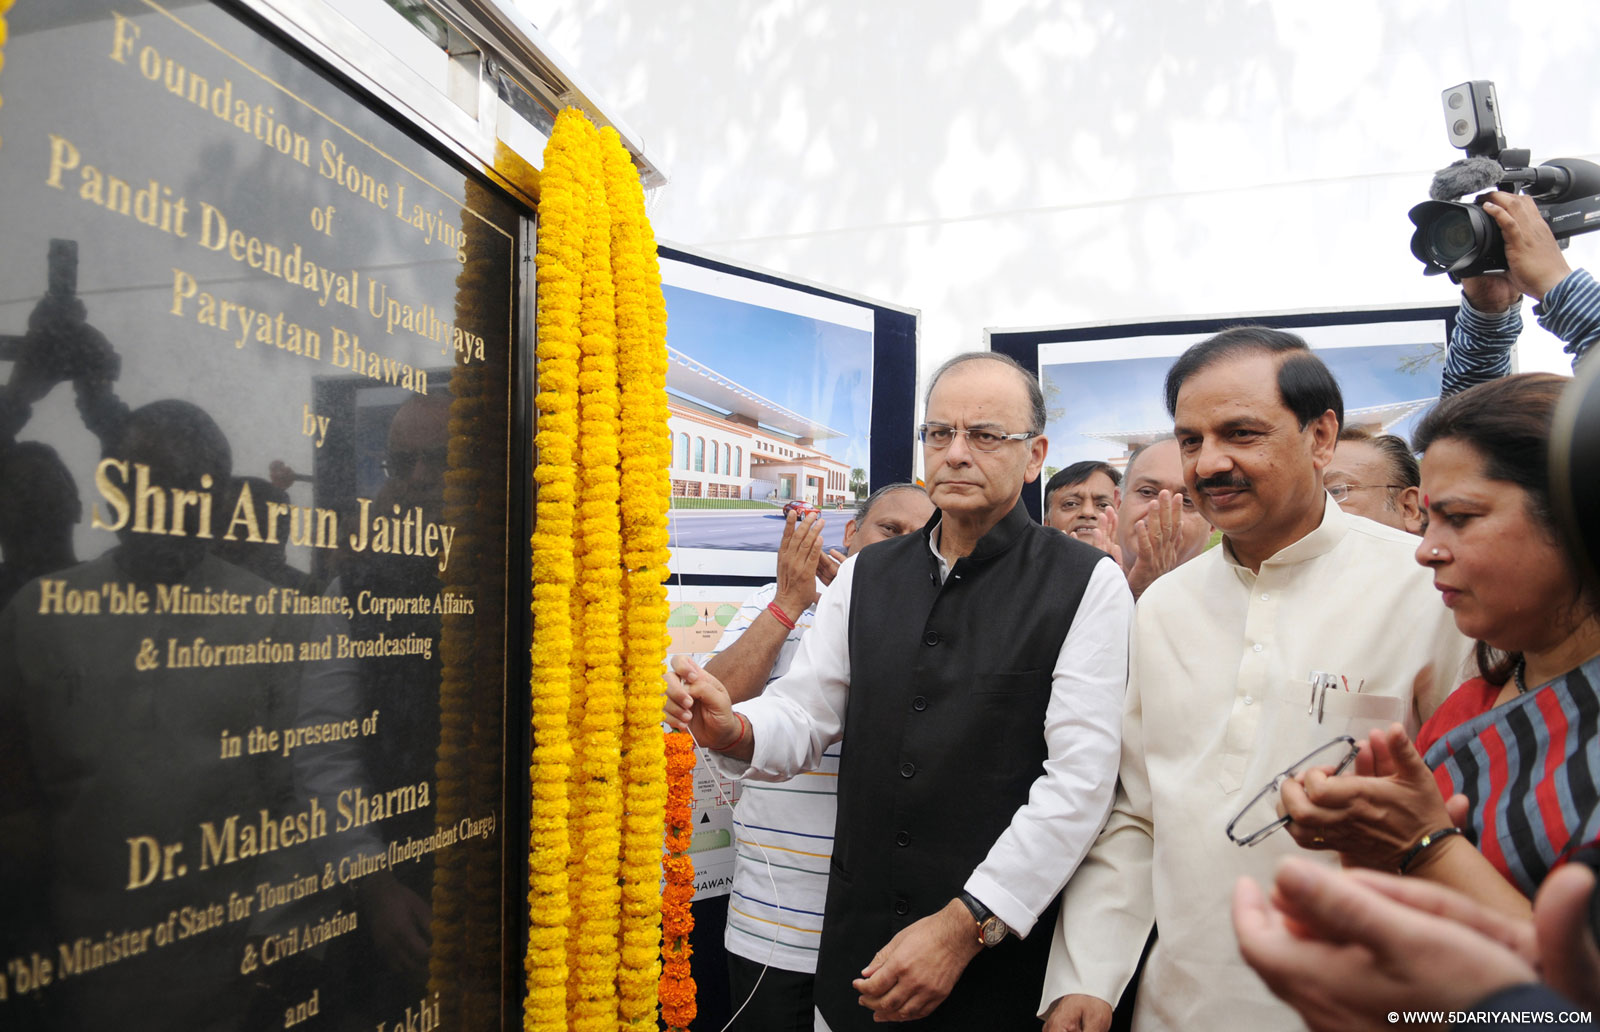 The Union Minister for Finance, Corporate Affairs and Information & Broadcasting, Shri Arun Jaitley addressing at the foundation stone laying ceremony of the new Office Complex of the Ministry of Tourism ‘Pt. Deen Dayal Upadhayay Paryatan Bhawan’, on the occasion of the World Tourism Day, in New Delhi on September 27, 2015. The Minister of State for Culture (Independent Charge), Tourism (Independent Charge) and Civil Aviation, Dr. Mahesh Sharma, the Secretary of Tourism, Shri Vinod Zutshi and ot